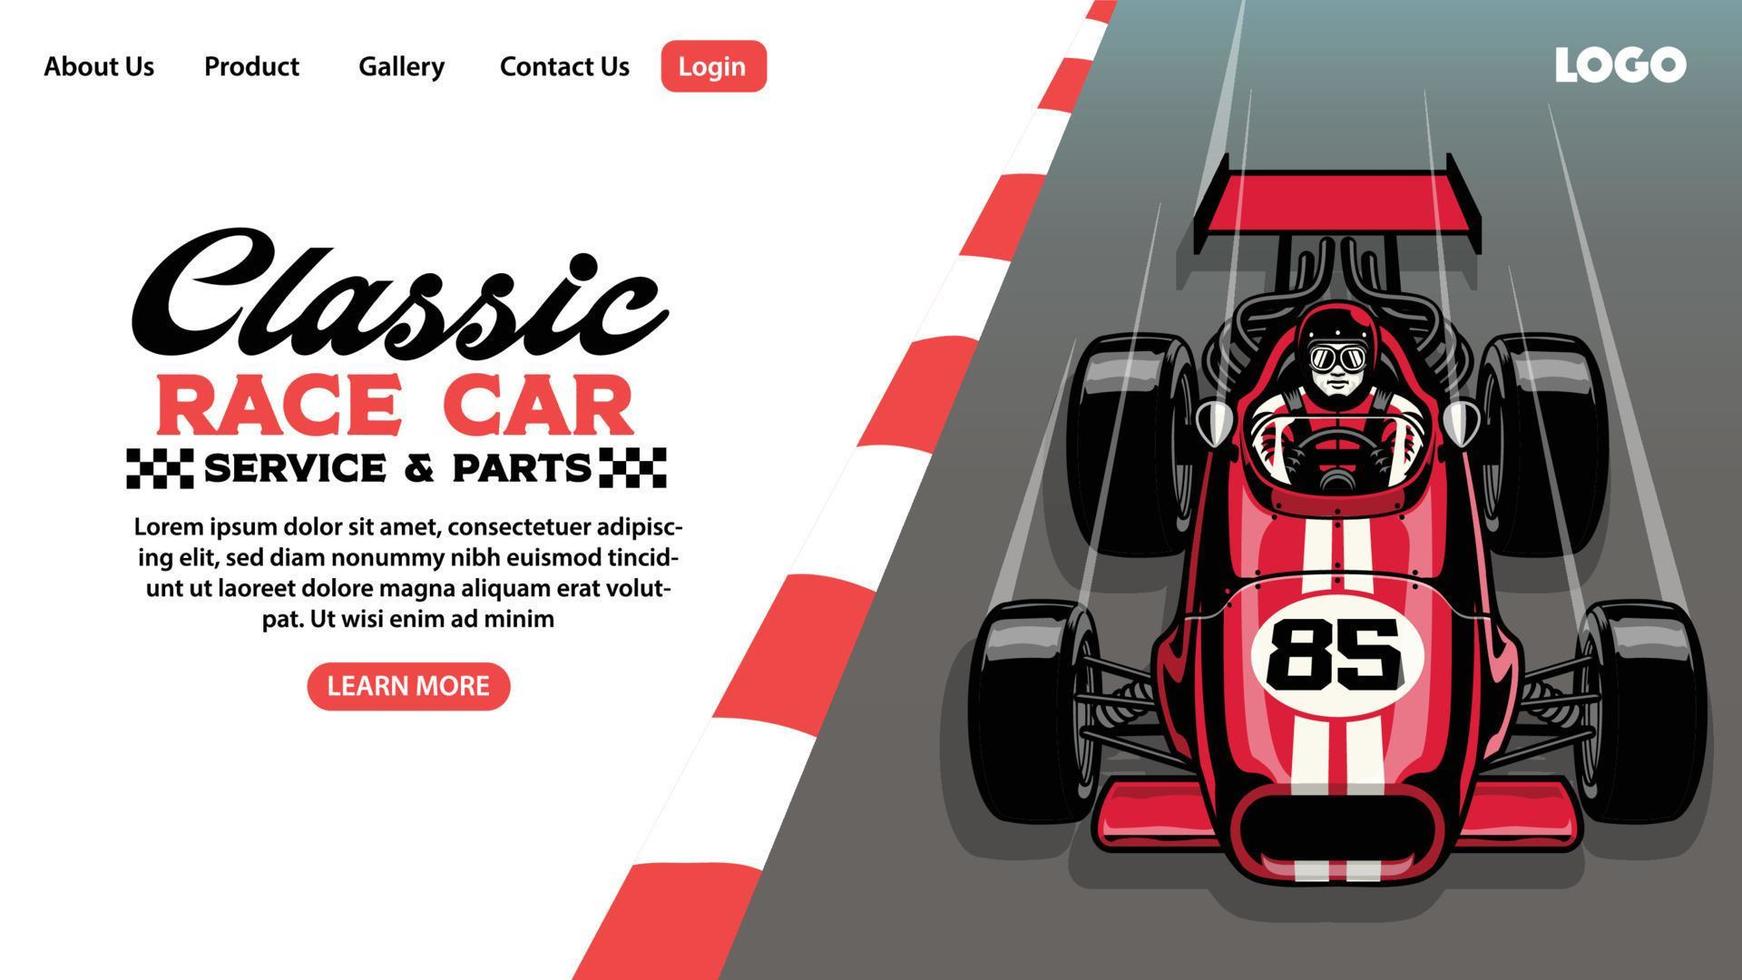 landing page design of classic race car garage business vector